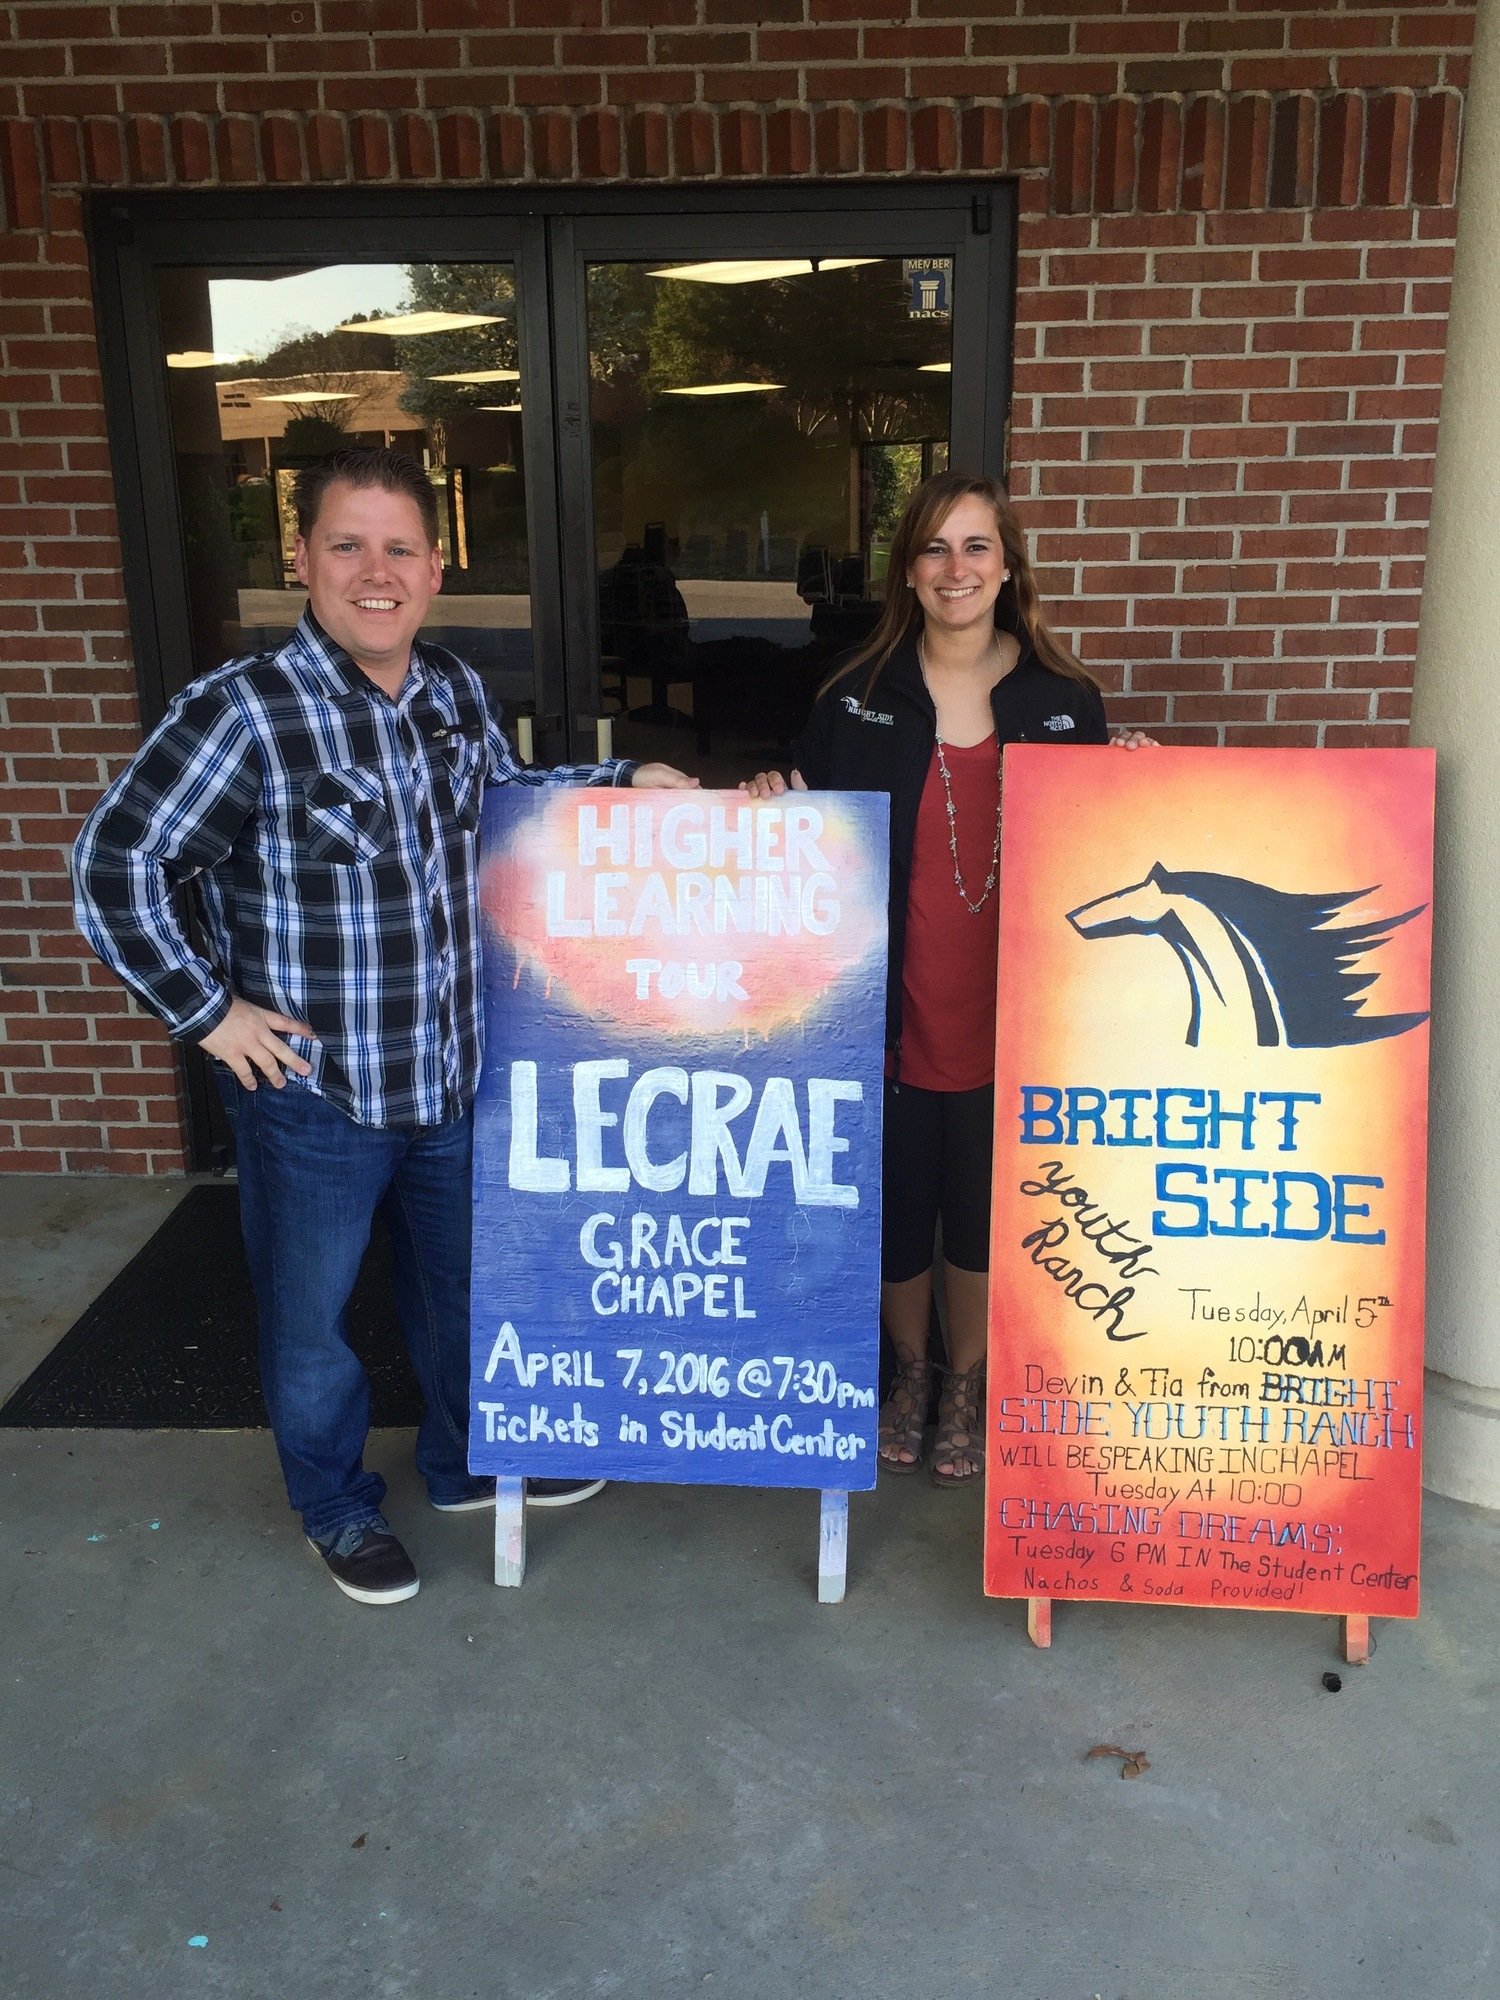 A man and a woman holding signs for Lecrae Grace Chapel and Bright Side Ranch